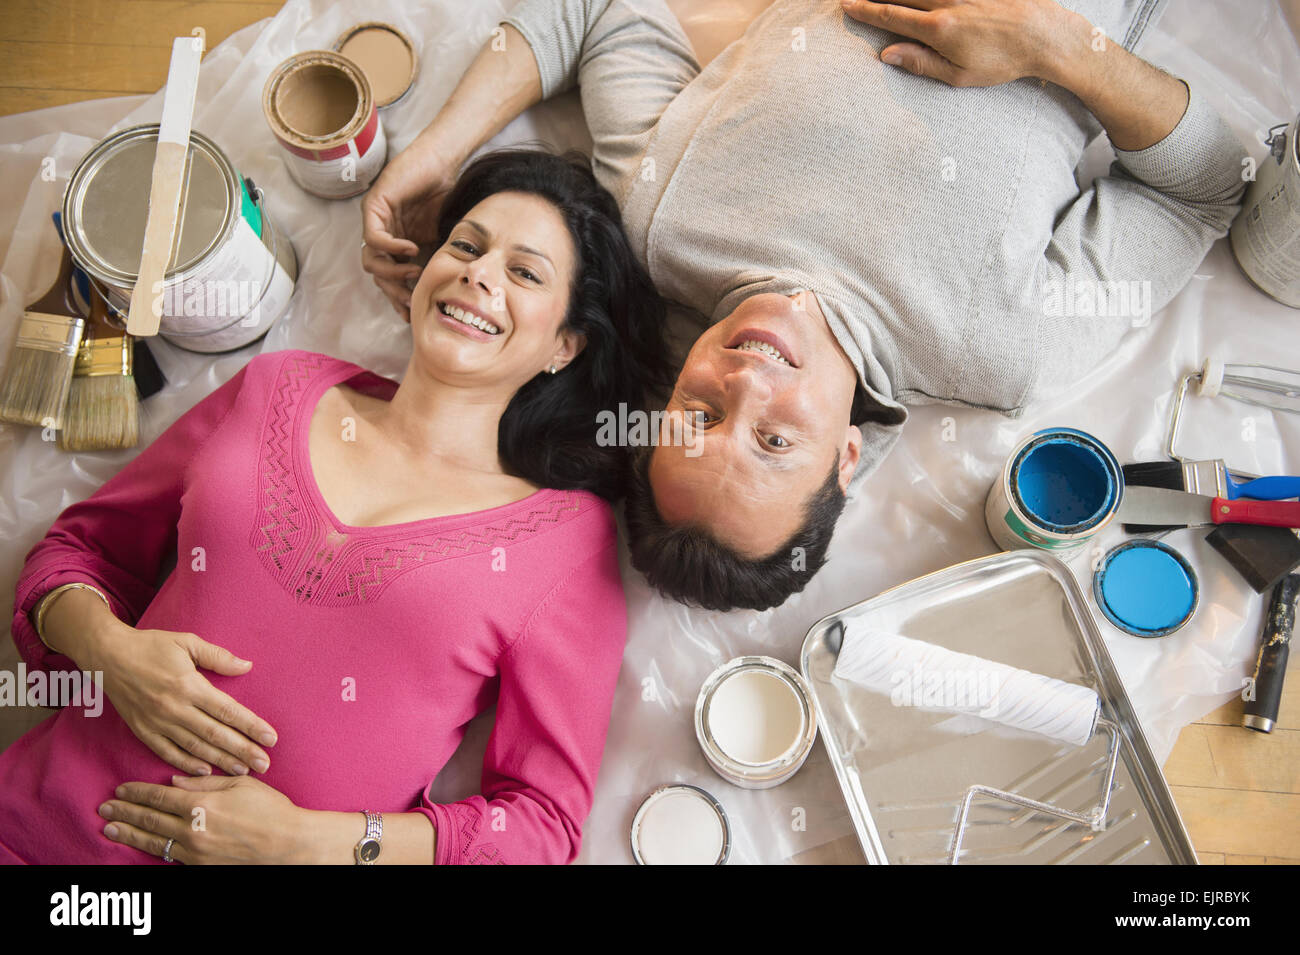 Overhead view of couple laying on drop cloth during remodeling Stock Photo